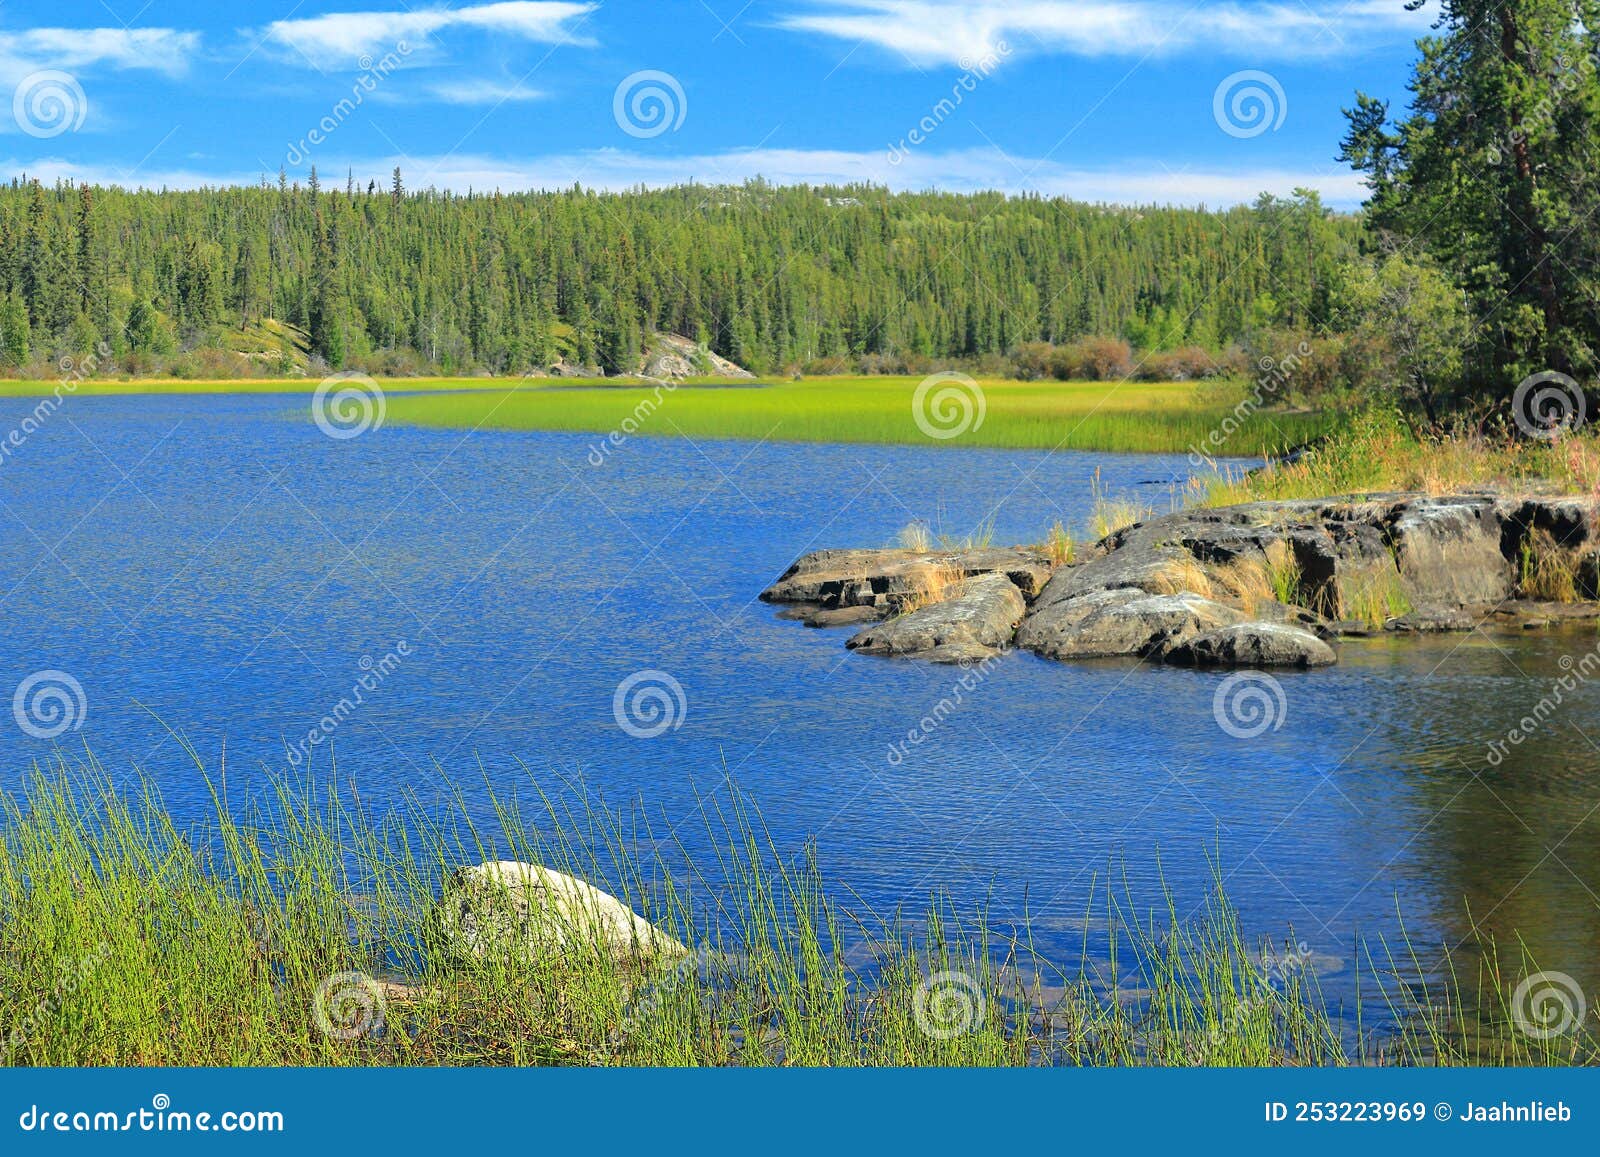 canadian shield rock outcroppings with cameron river flowing through reeds and rocks, hidden lake territorial park, canada